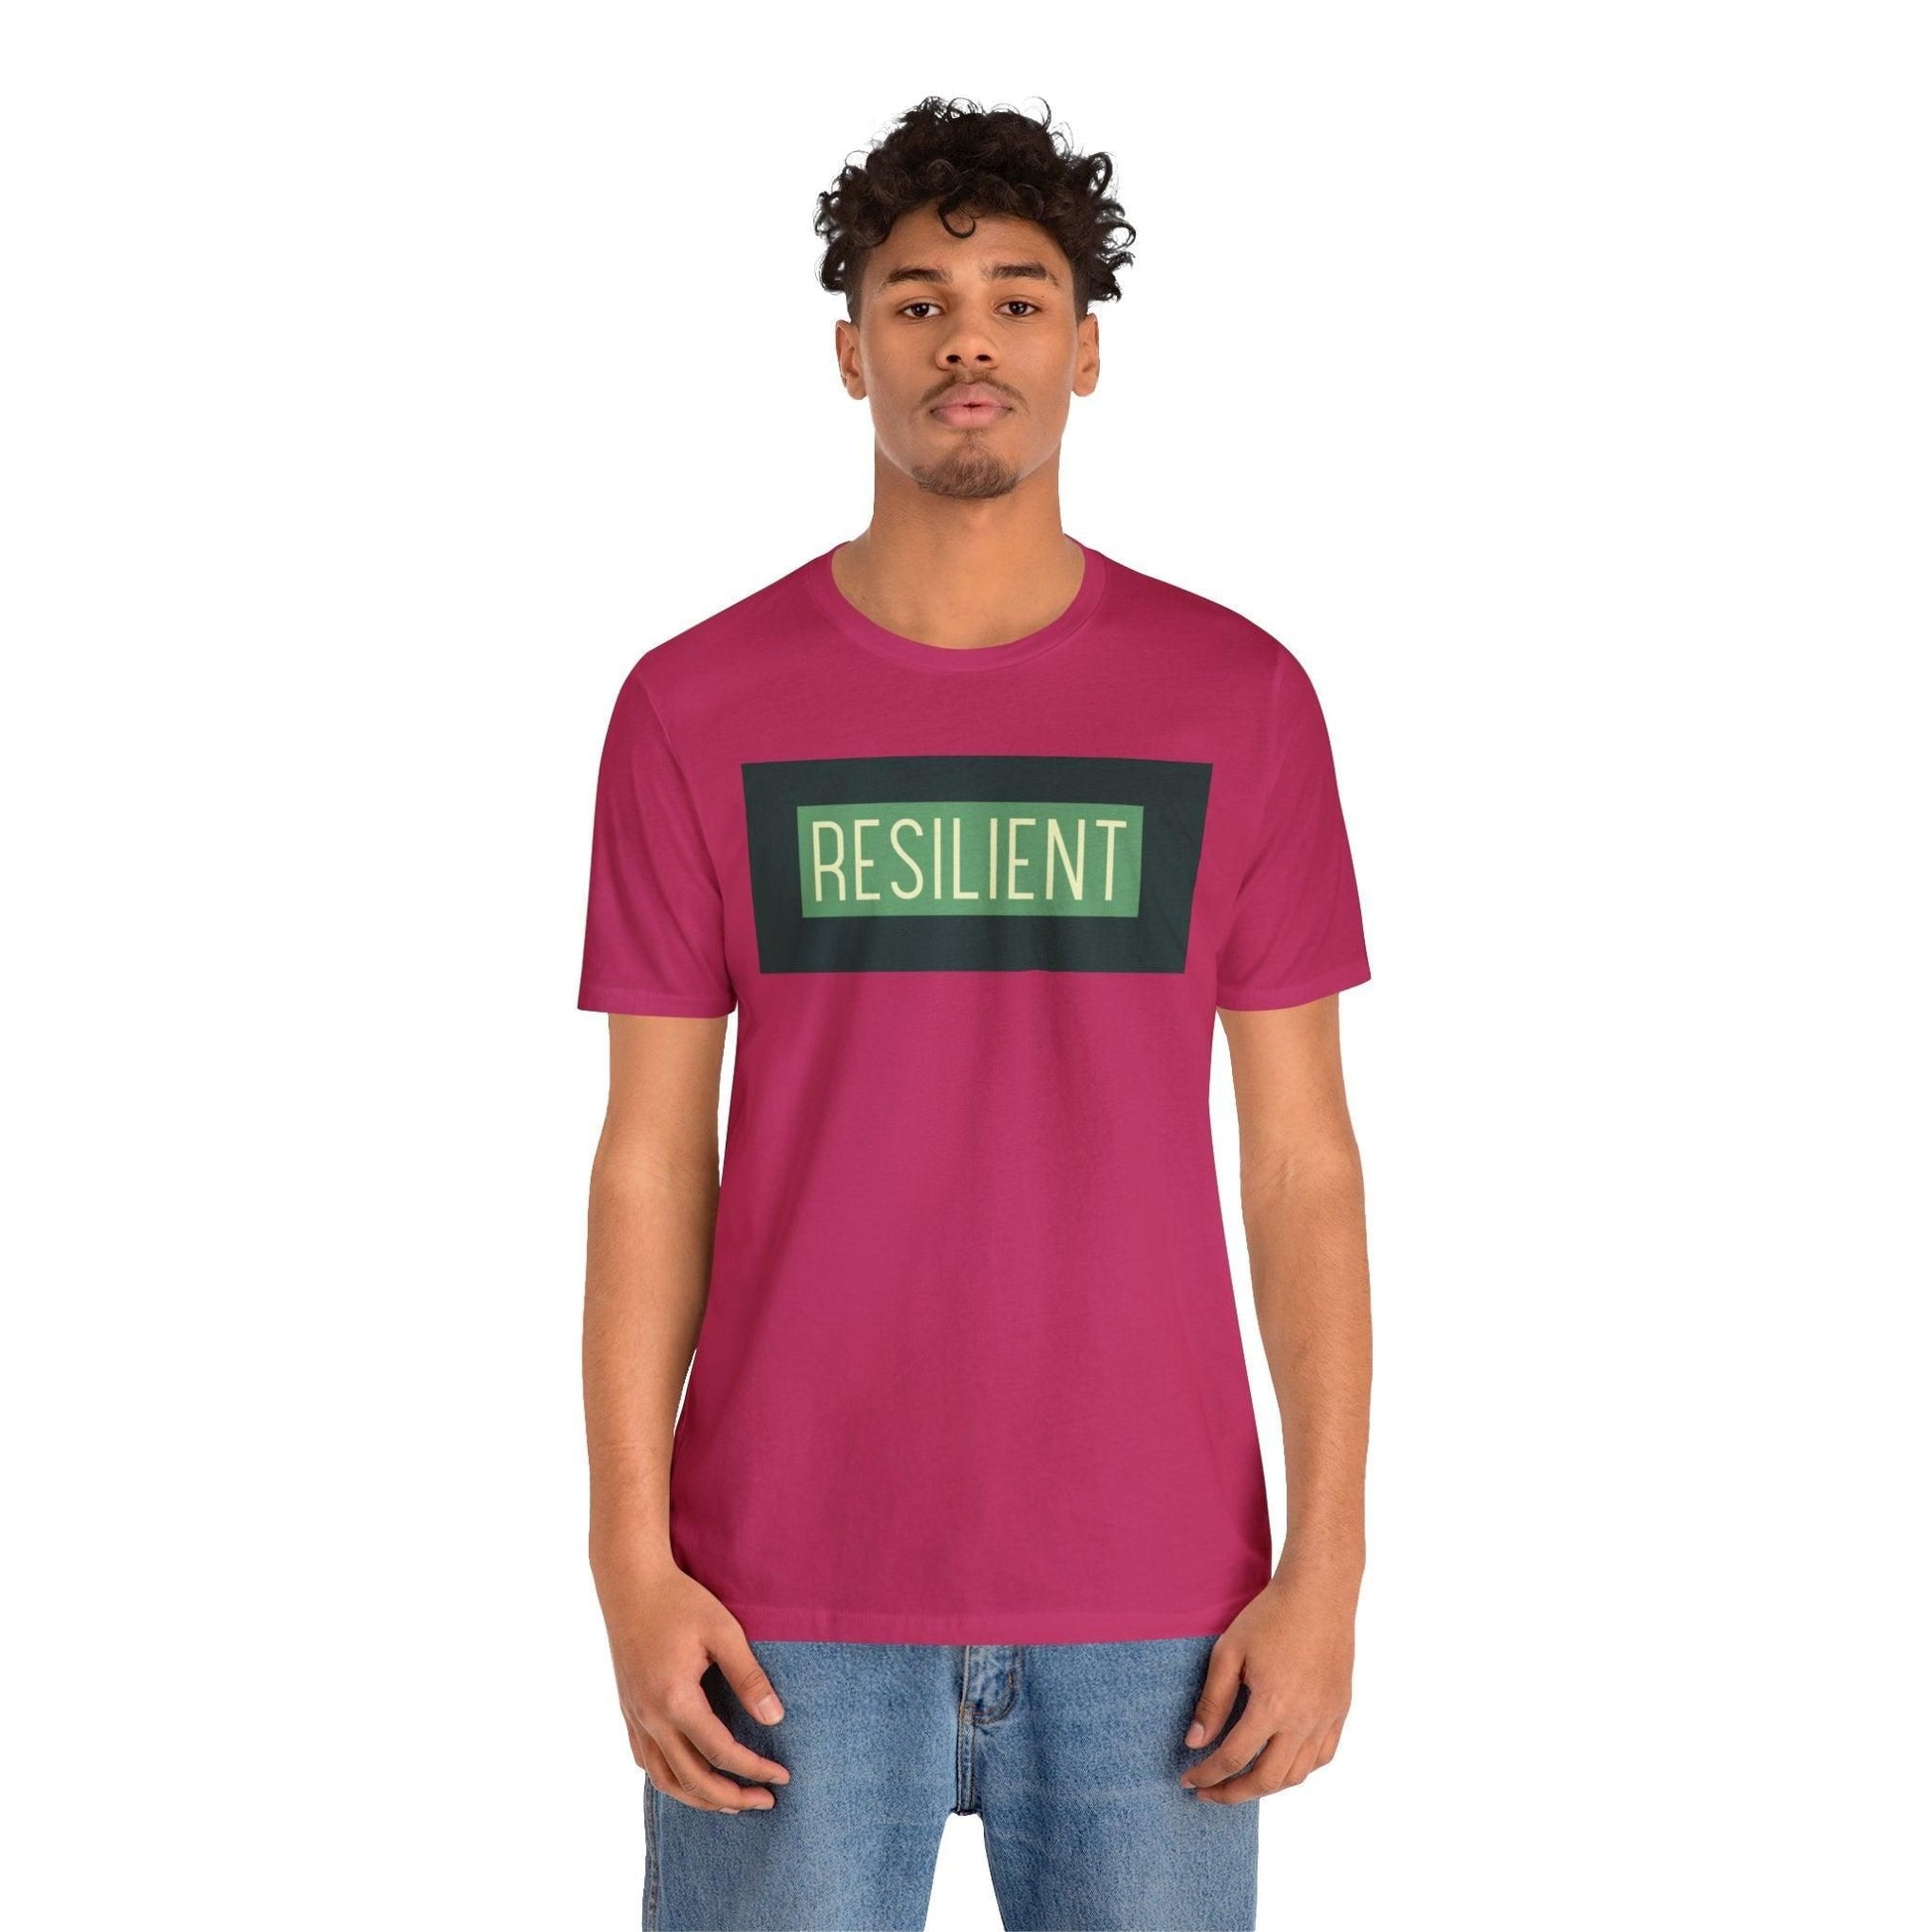 Resilient Unisex Tee T-Shirt Berry XS 